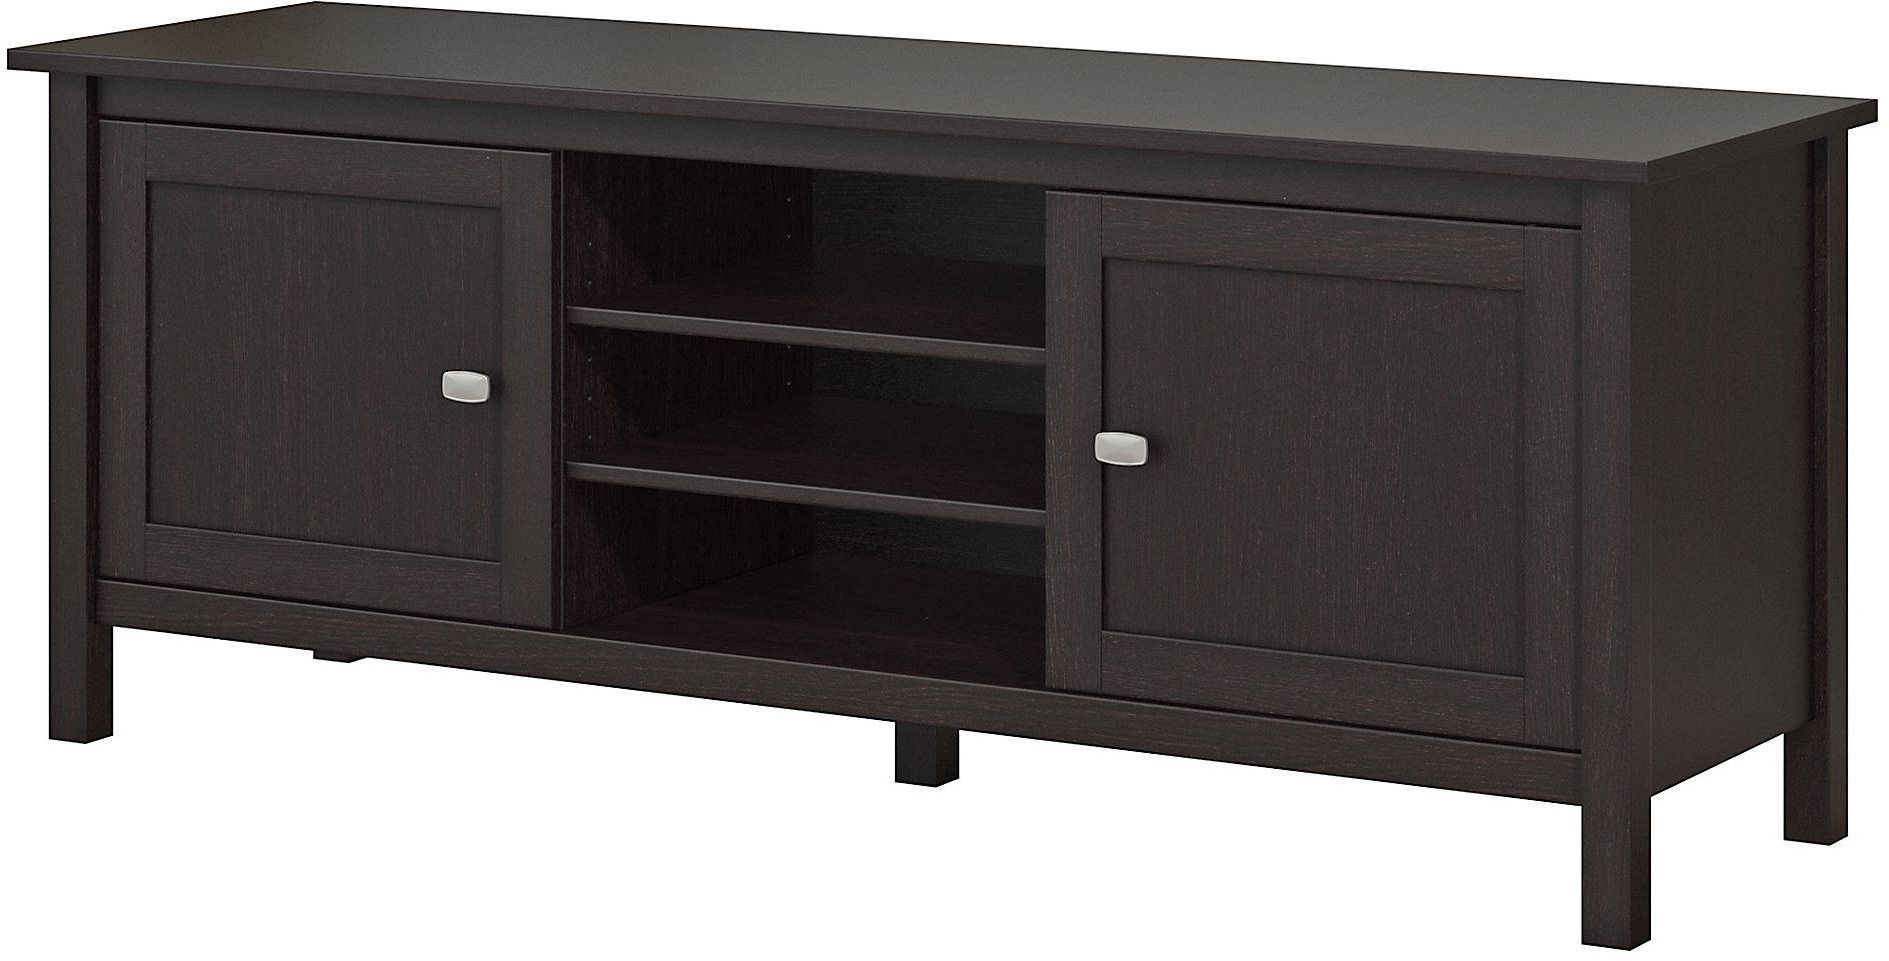 2017 Neilsen Tv Stands For Tvs Up To 65" With Regard To Broadview Espresso Oak 65" Tv Stand From Bush (View 17 of 25)